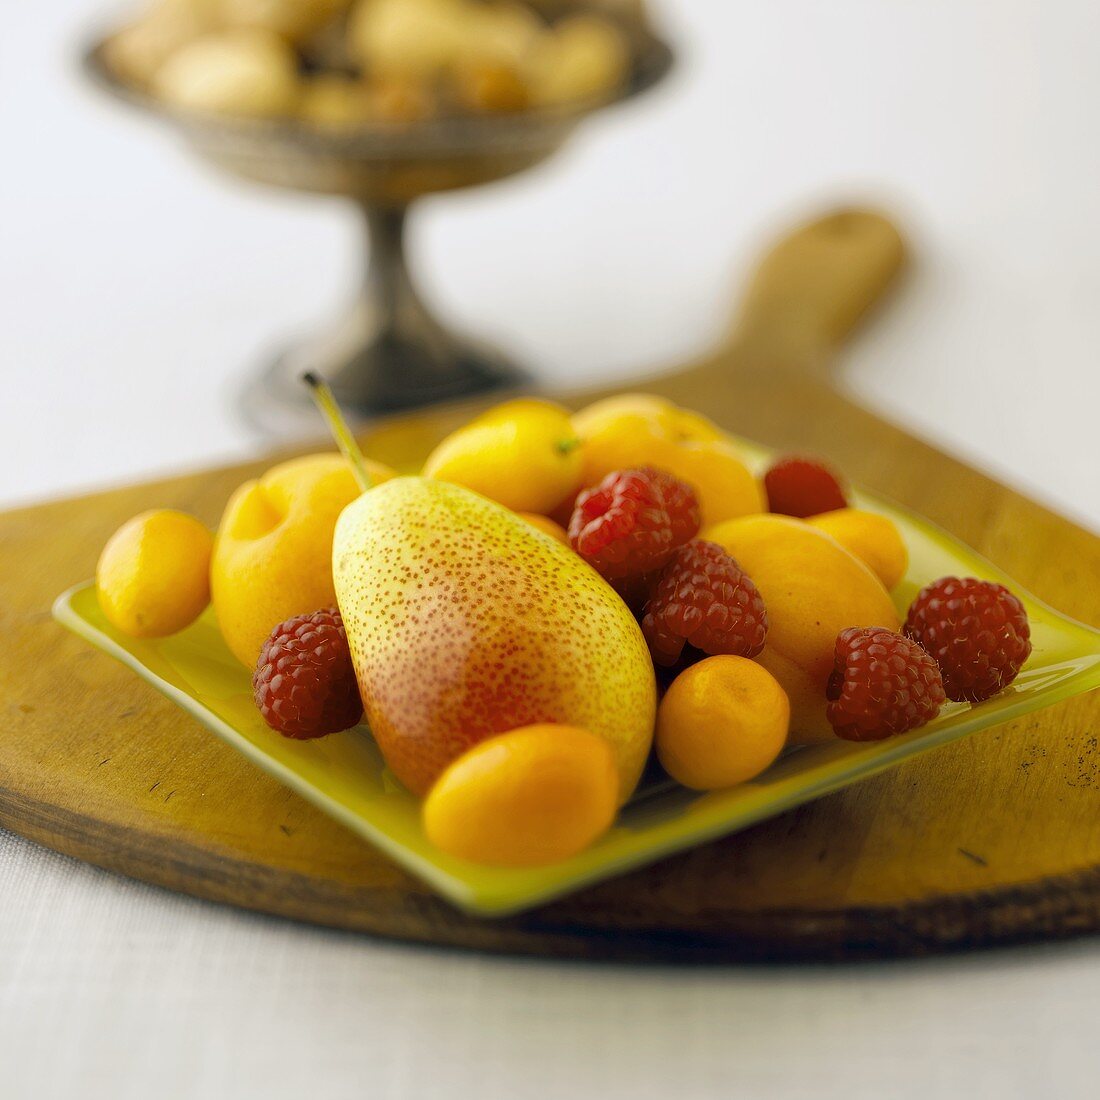 Apricots, Raspberries and a Pear on a Square Glass Plate